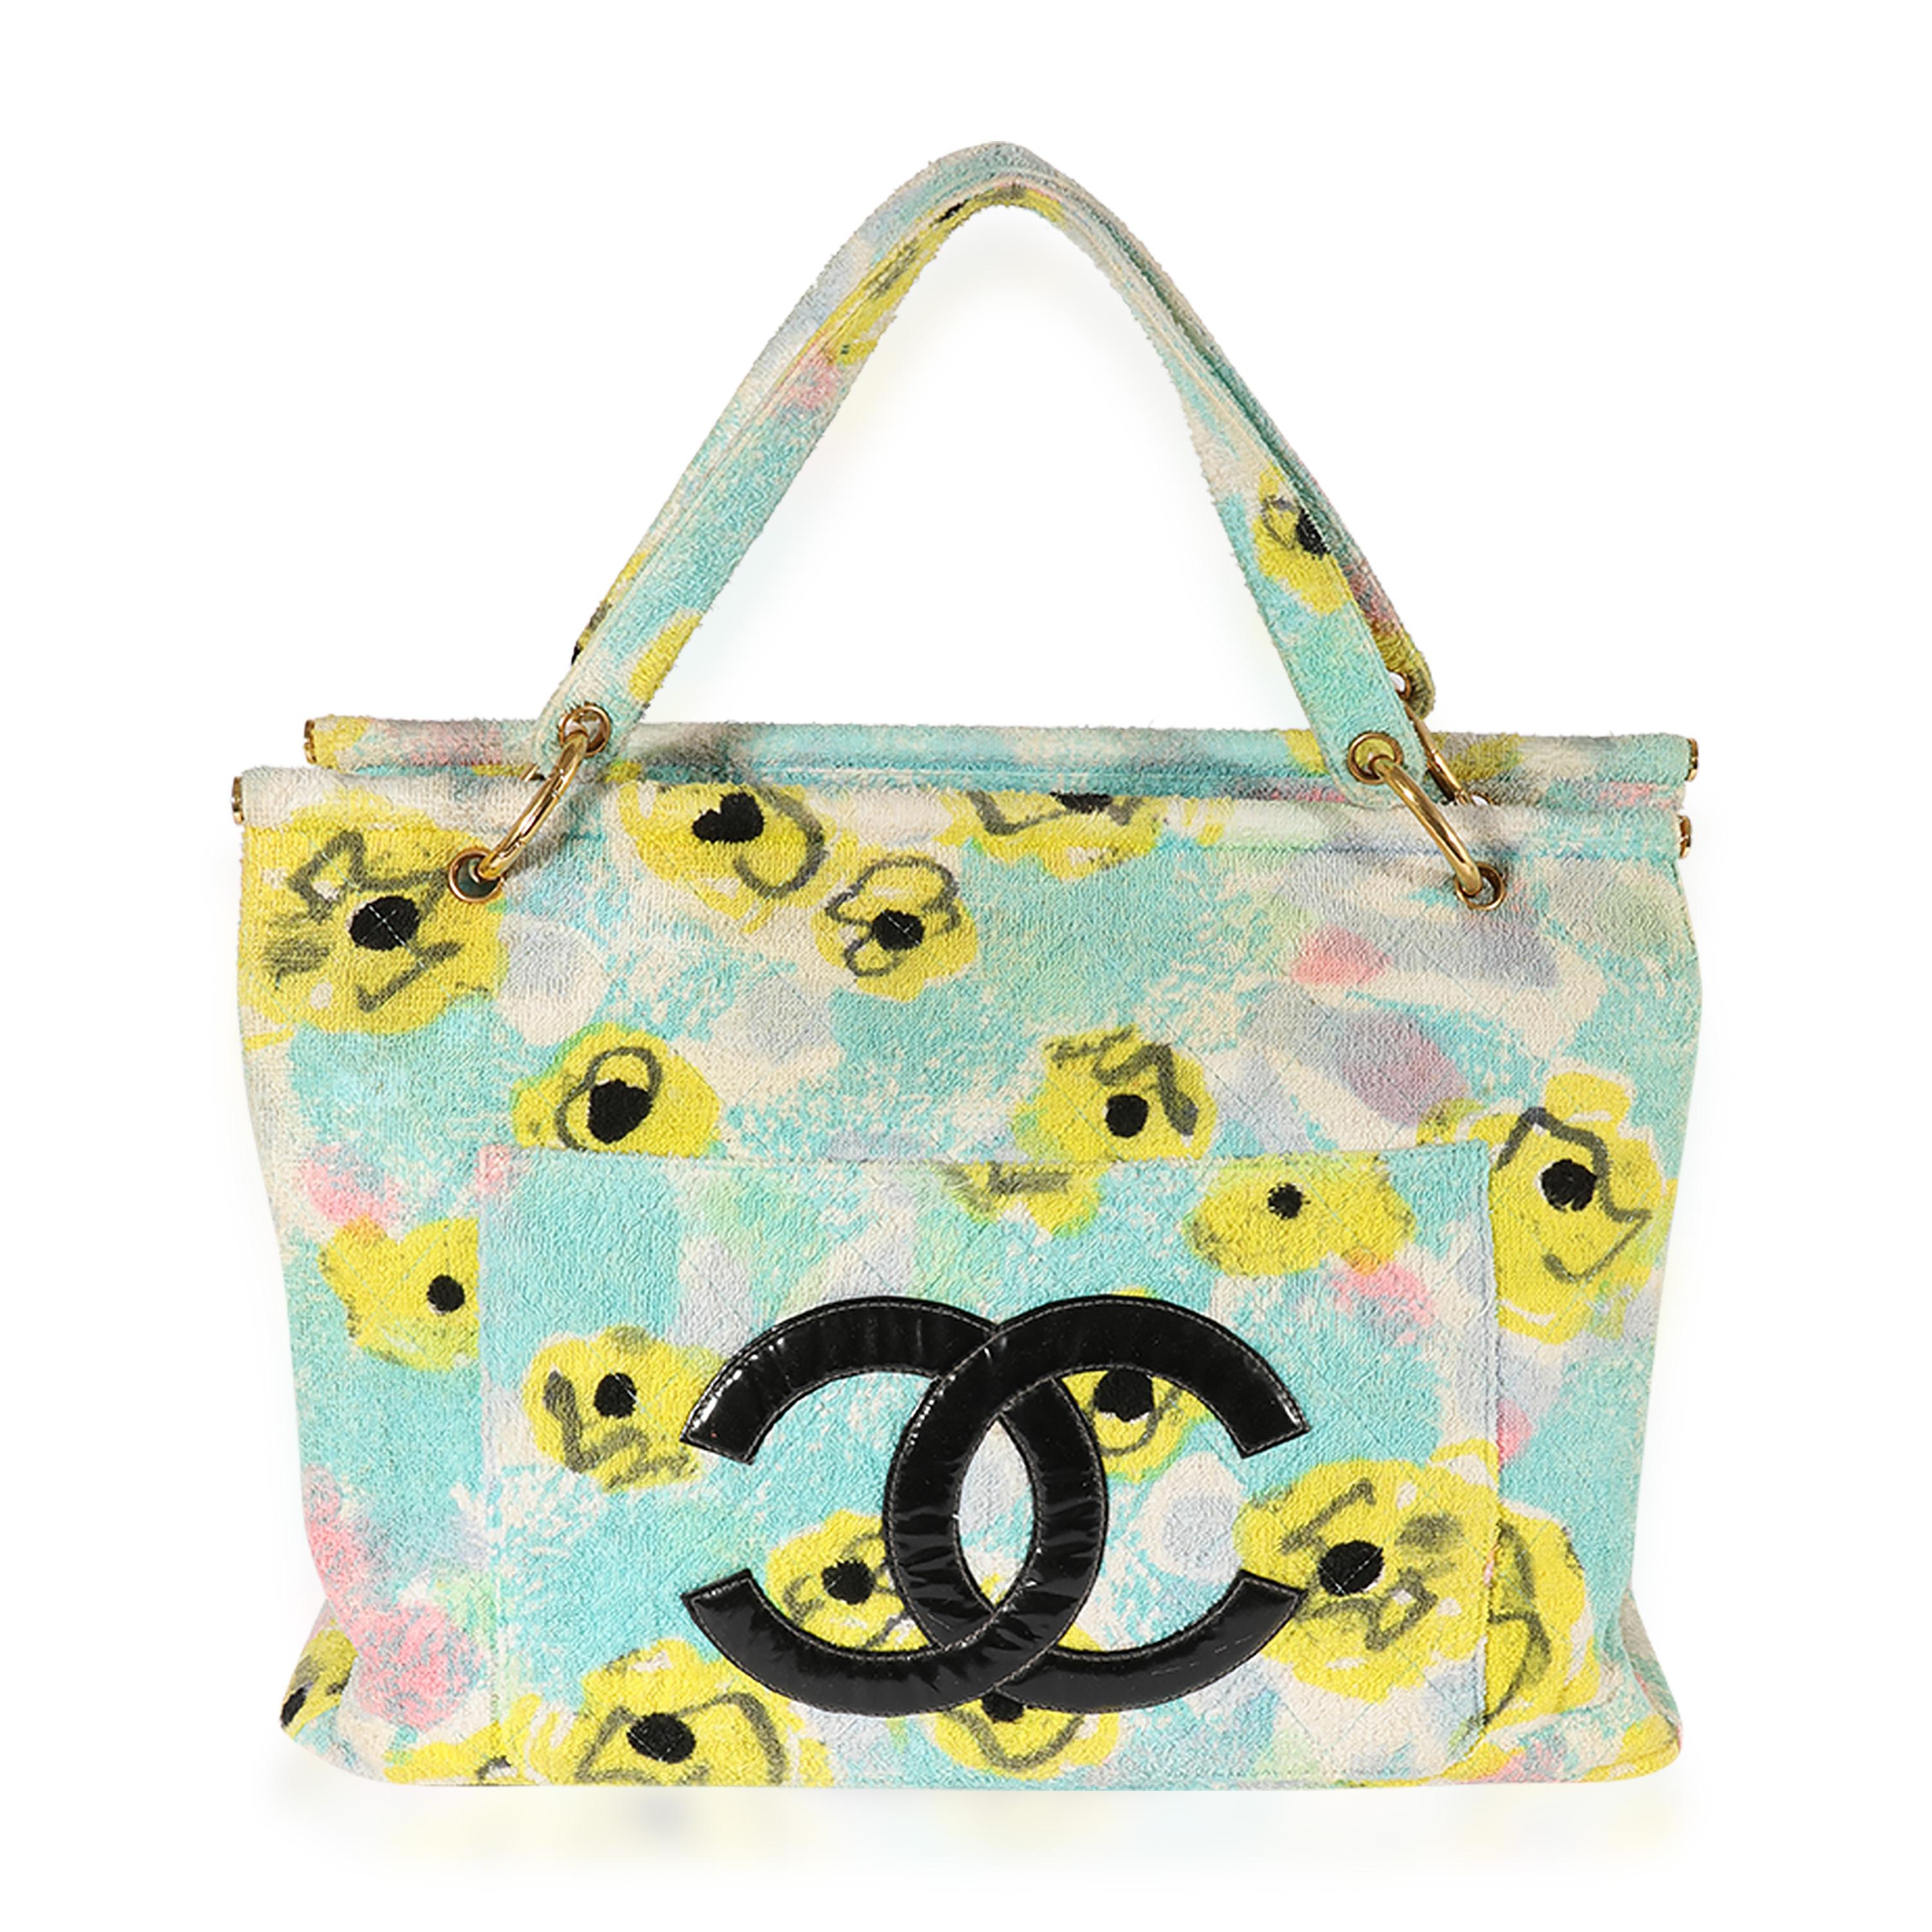 Listing Title: Chanel Multicolor Floral Print Terrycloth Frame Tote
SKU: 122800
Condition: Pre-owned 
Handbag Condition: Very Good
Condition Comments: Very Good Condition. Scuffing and discoloration at corners. Scratching at hardware. Interior